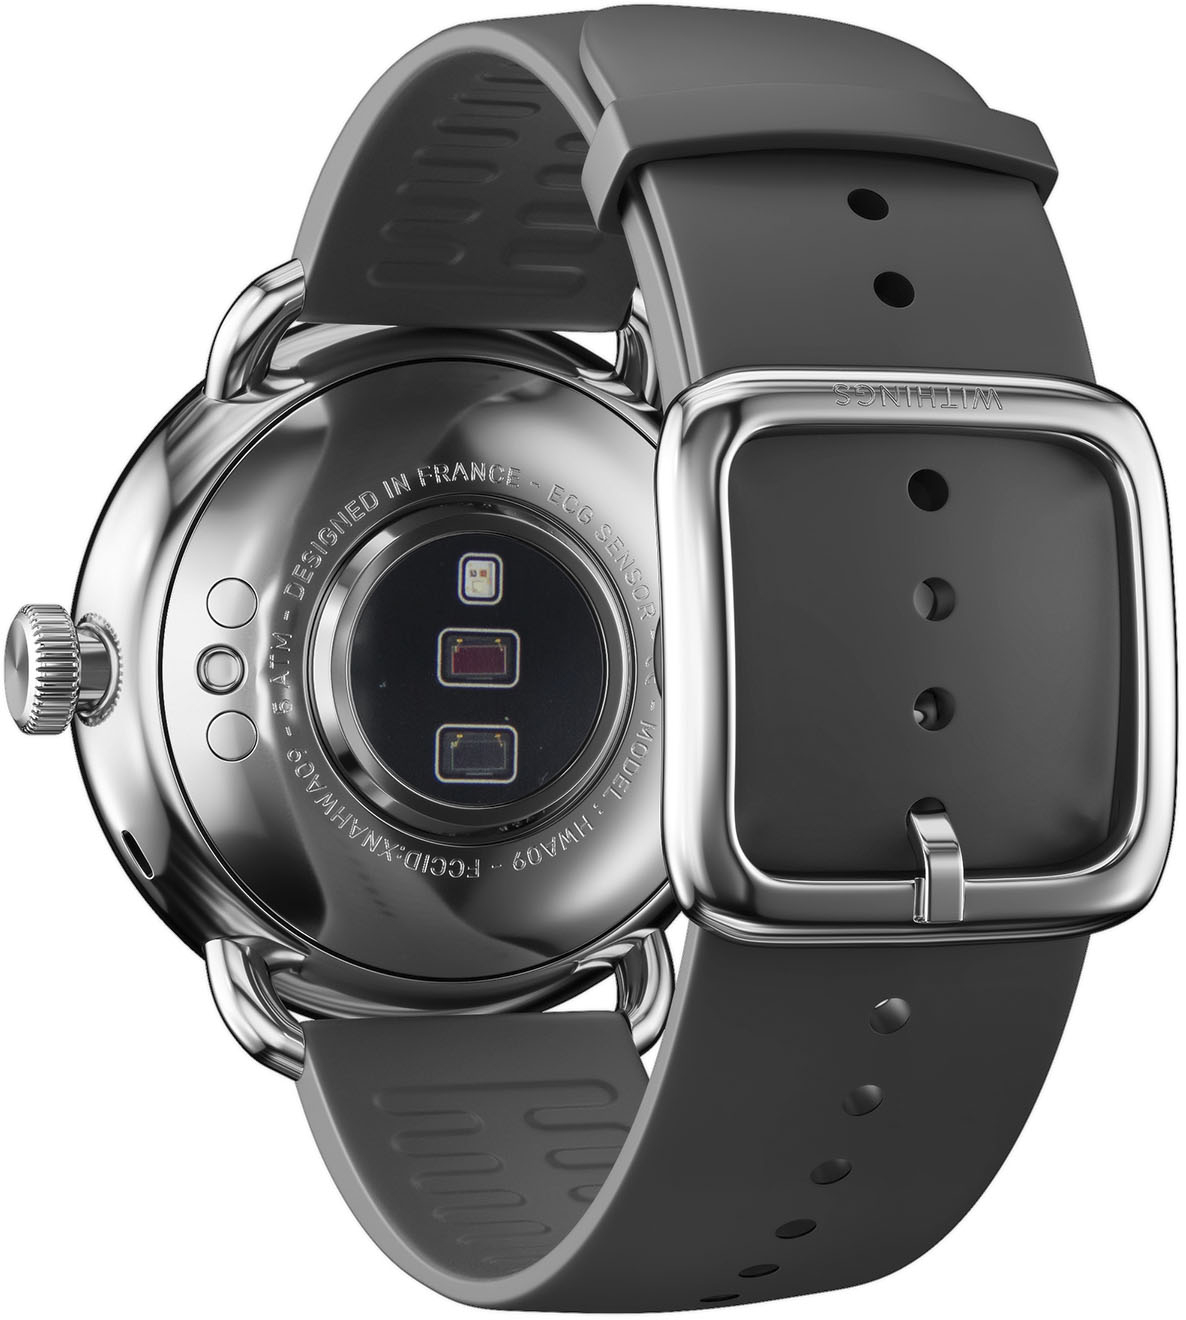 Withings ScanWatch 2 (Black, 38 mm) Hybrid smartwatch with heart rate  monitor at Crutchfield